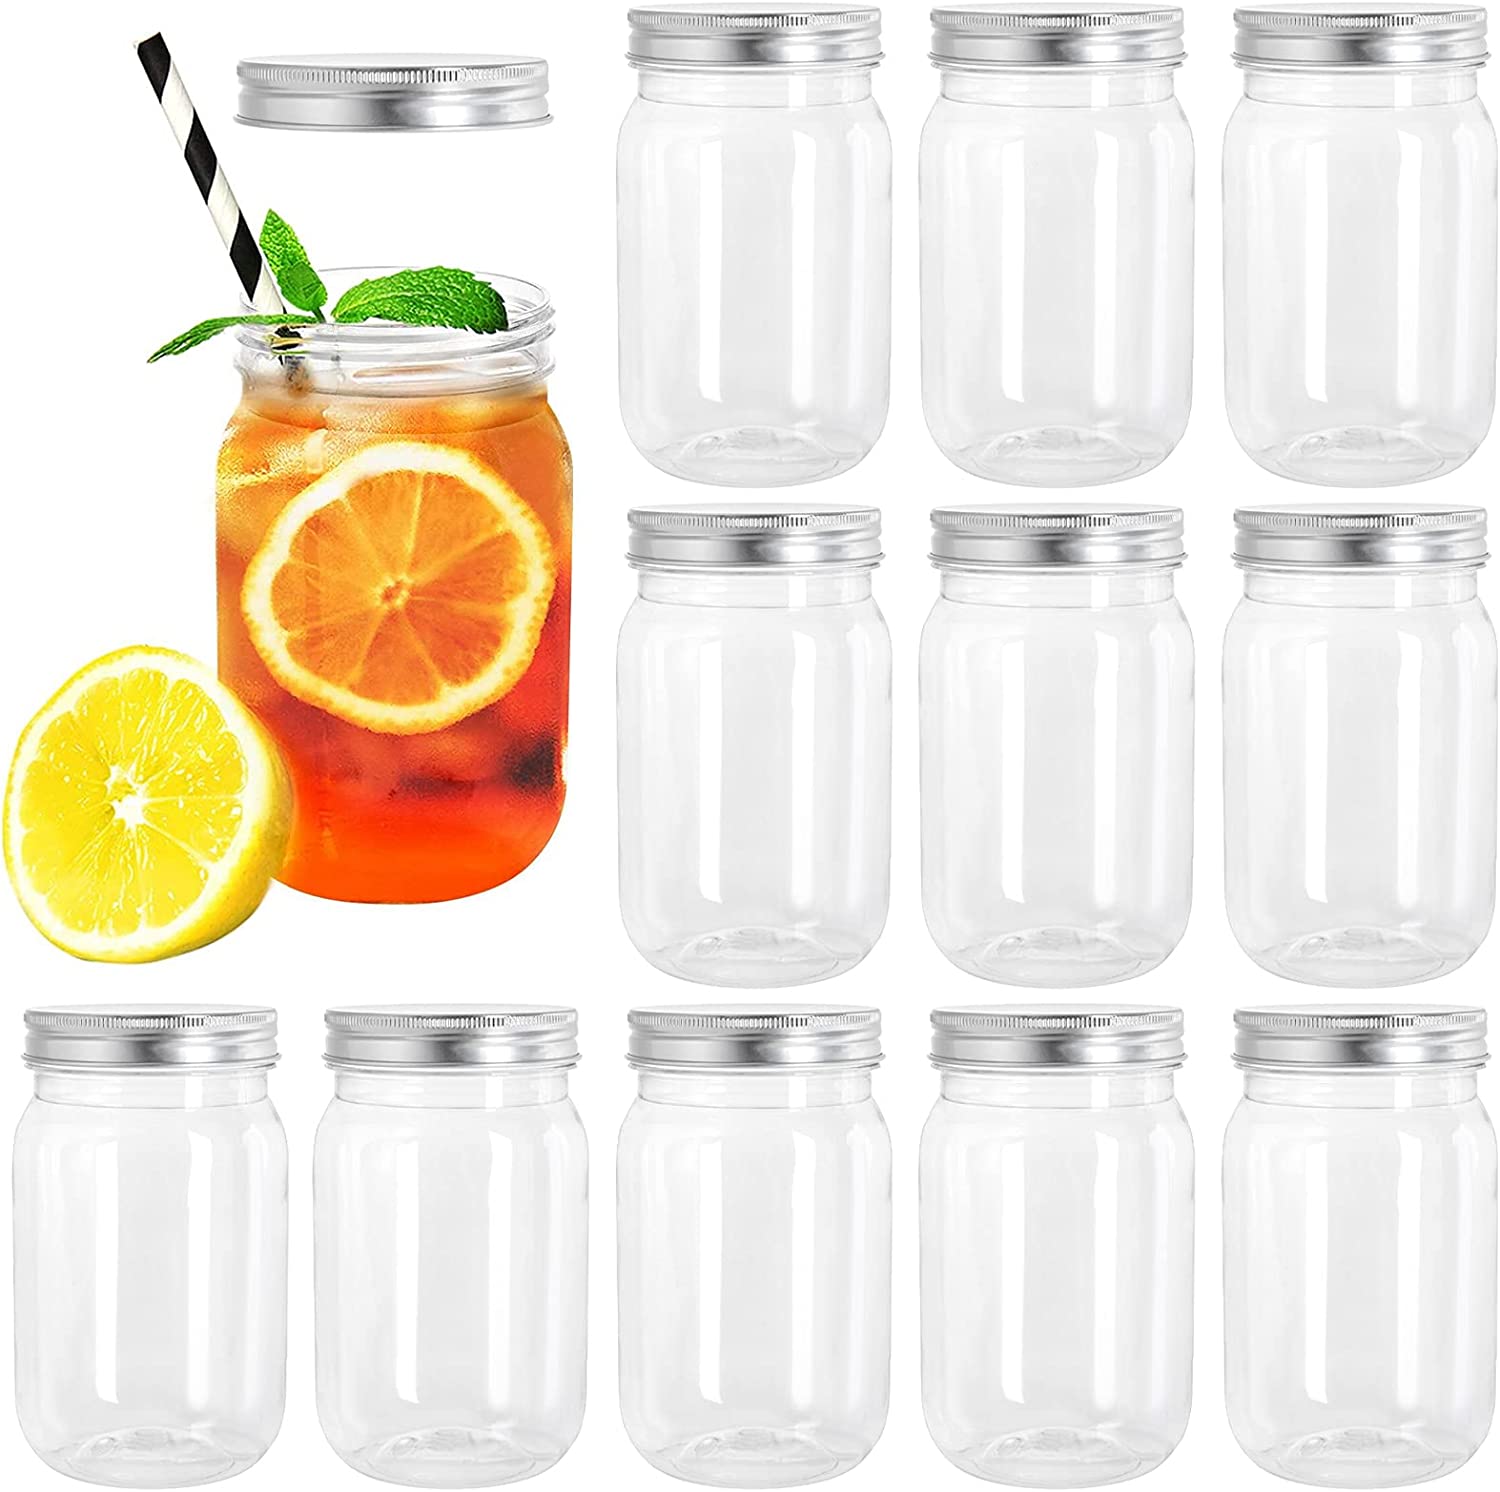 novelinks 16 OZ Clear Plastic Mason Jars with Airtight Lids - Plastic Mason  Jars 16 OZ Plastic Jars with Lids for Kitchen & Household Storage (6 PACK